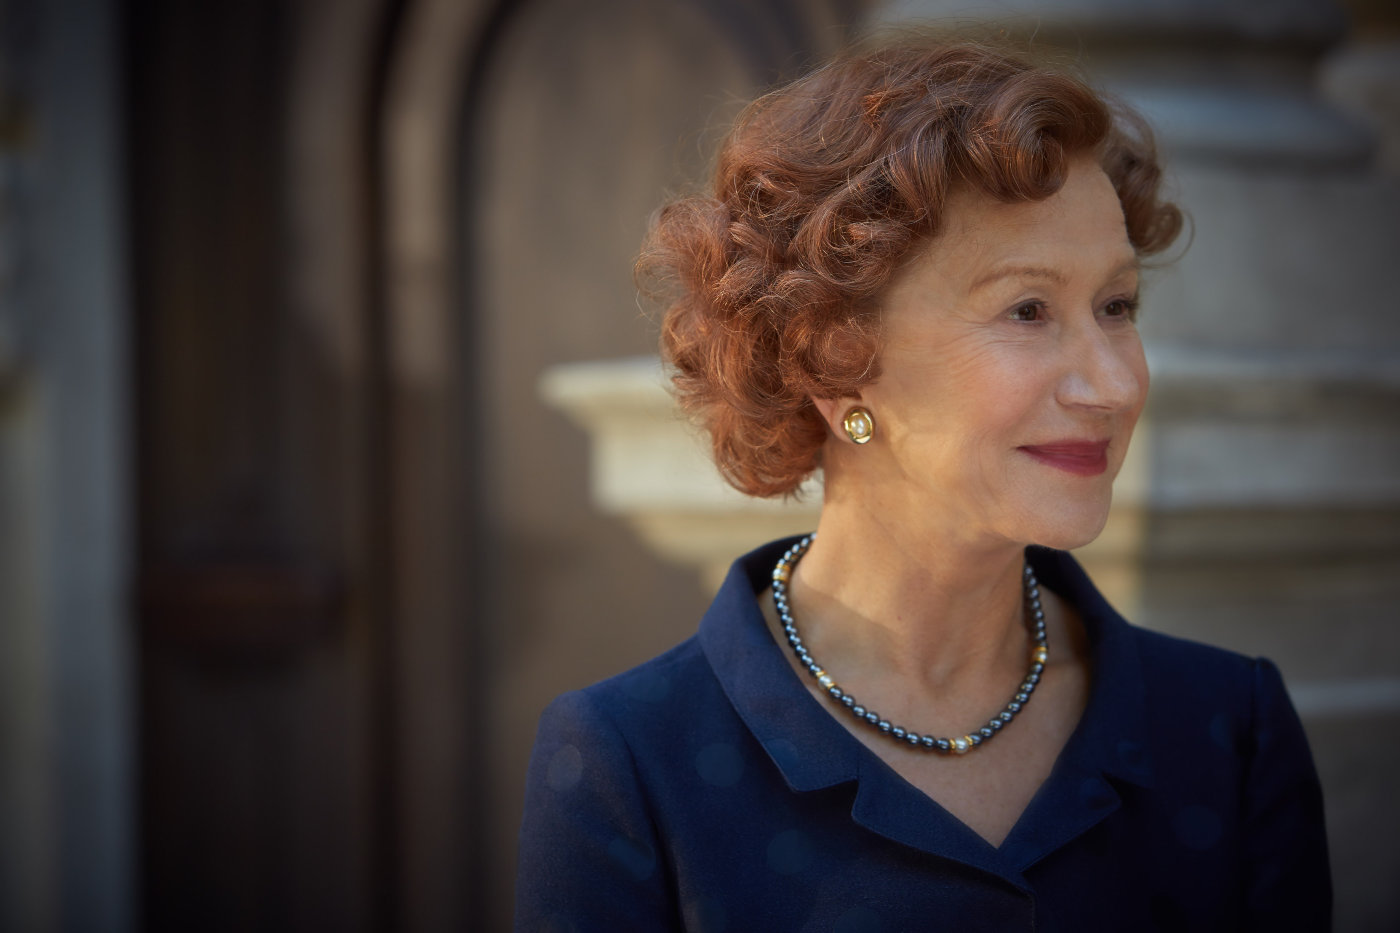 Summary: Woman in Gold is entertaining but would be taken more 